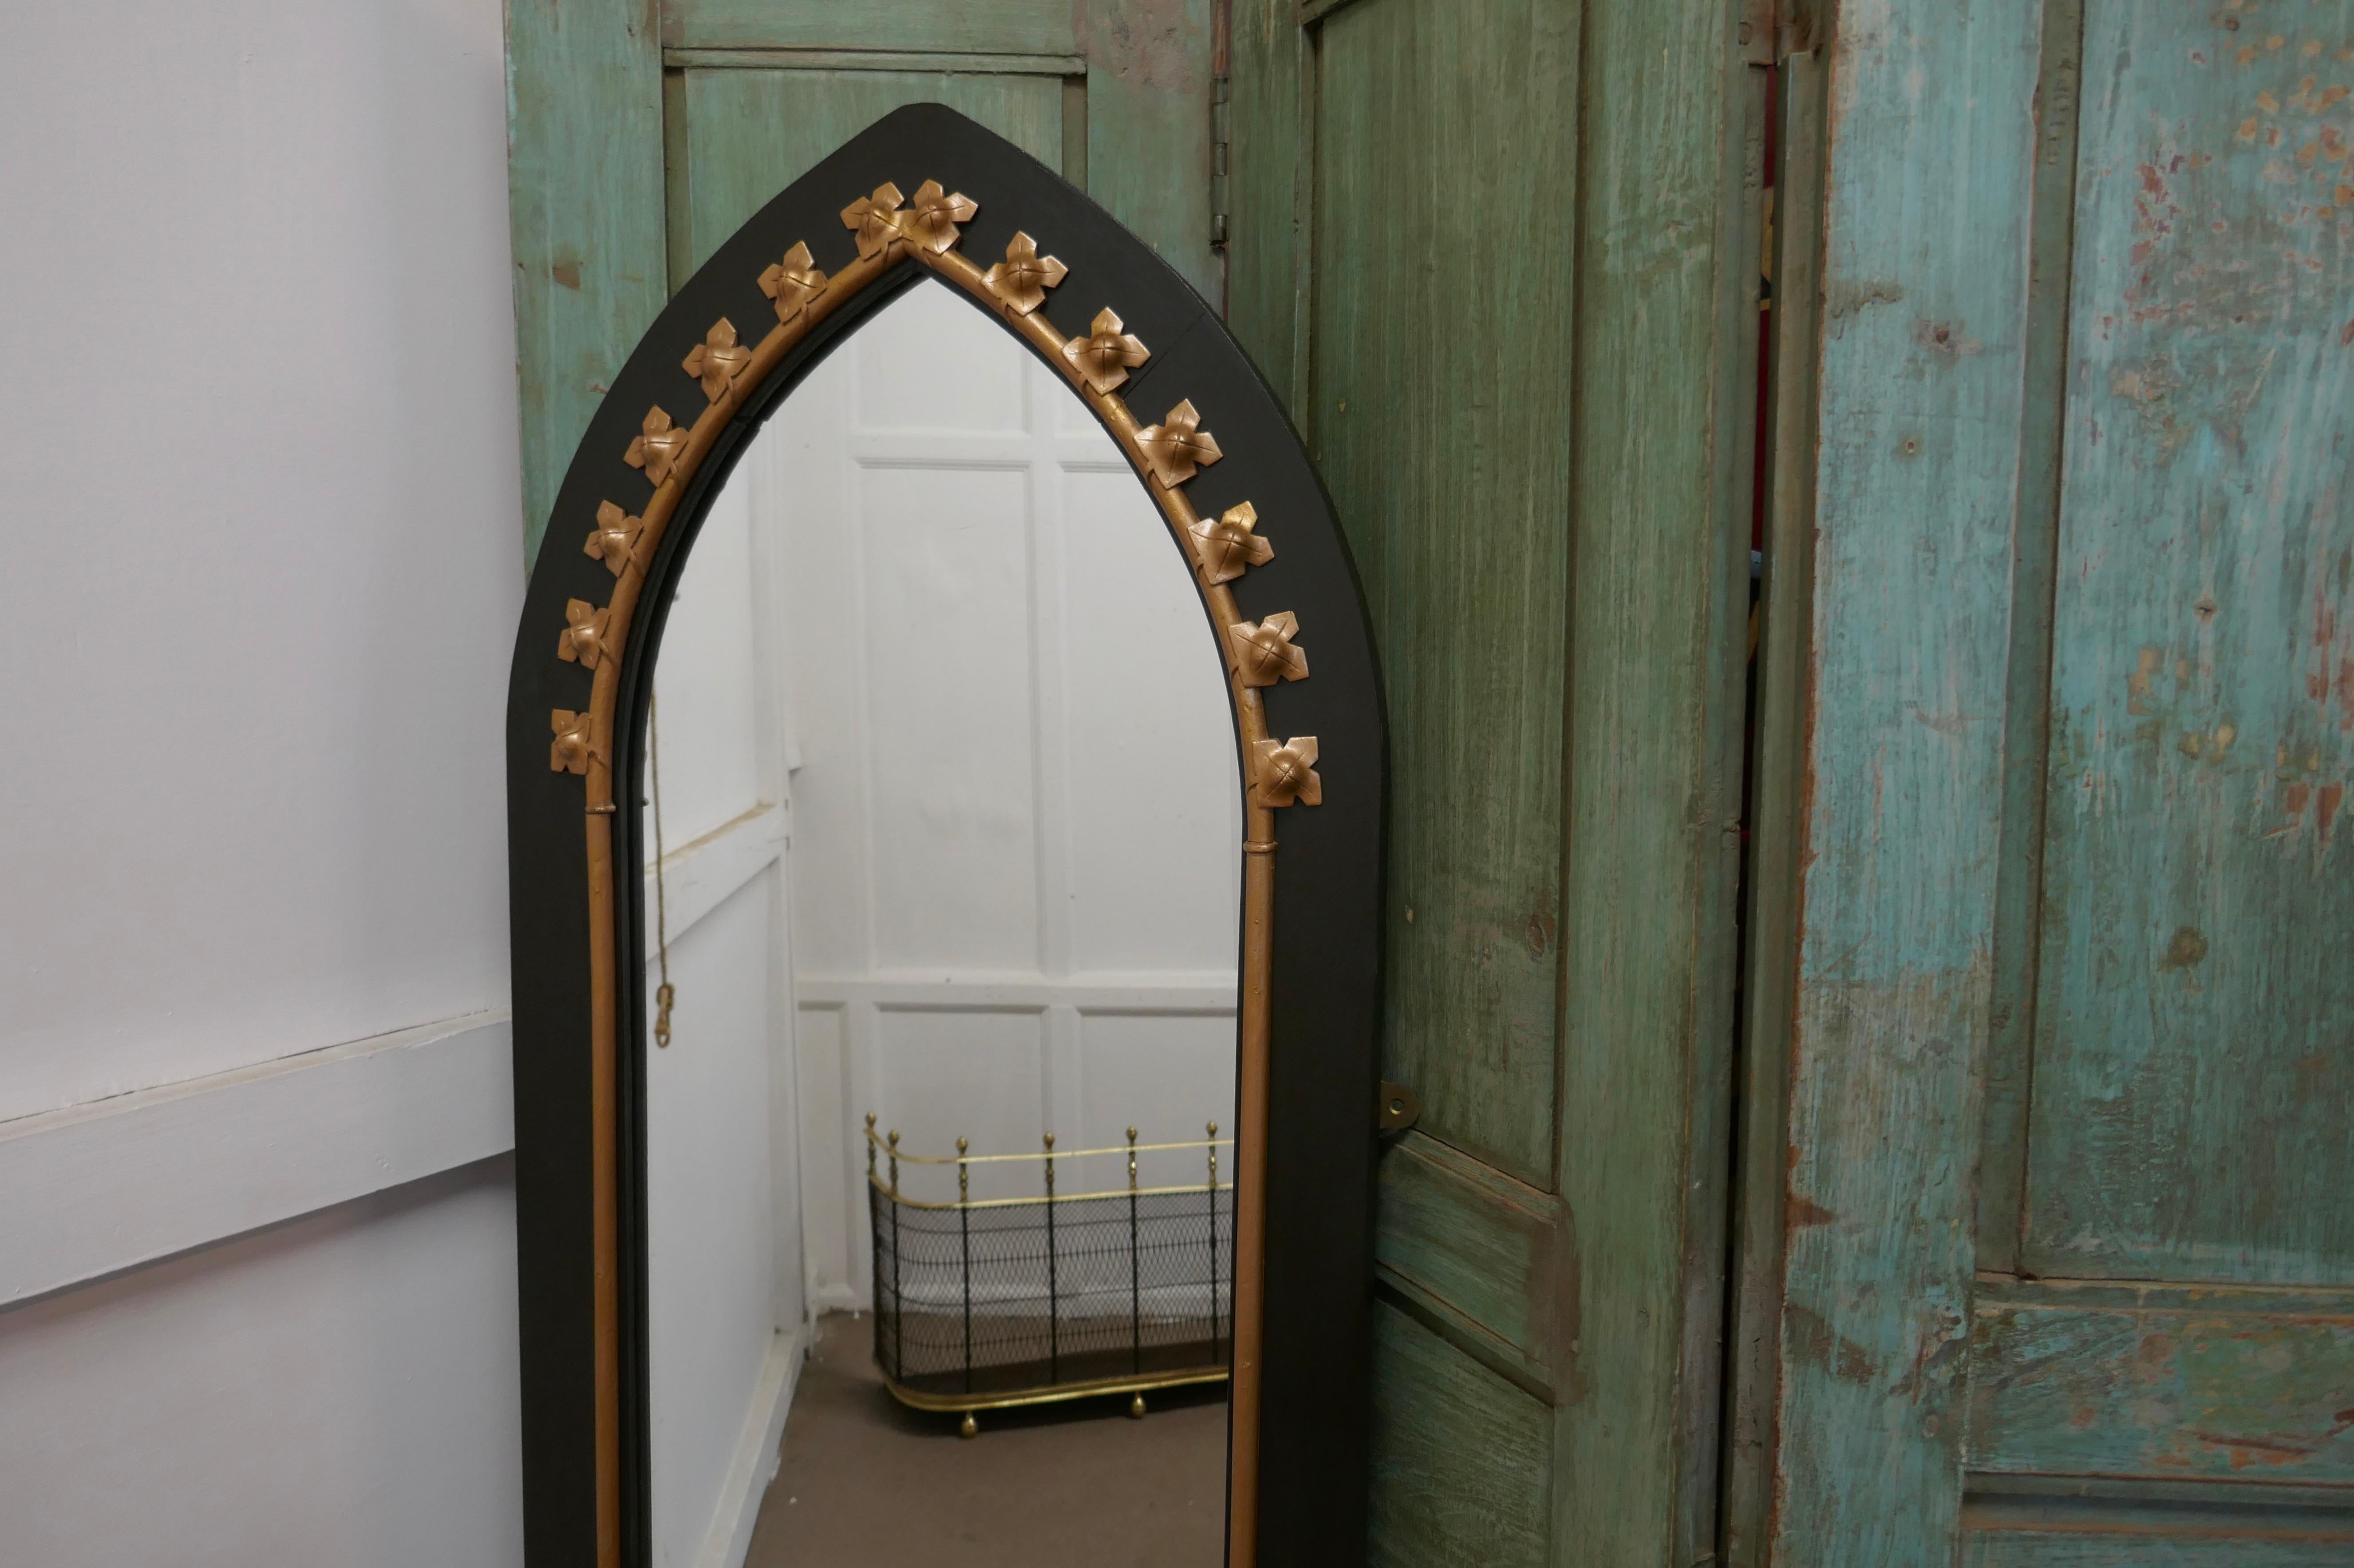 A tall console mirror, with an Arts & Crafts Gothic frame

This very tall mirror has a painted black frame declared in gold in the Gothic style
Both the frame and the mirror are in good condition,
A good decorative piece
The mirror is 68” high